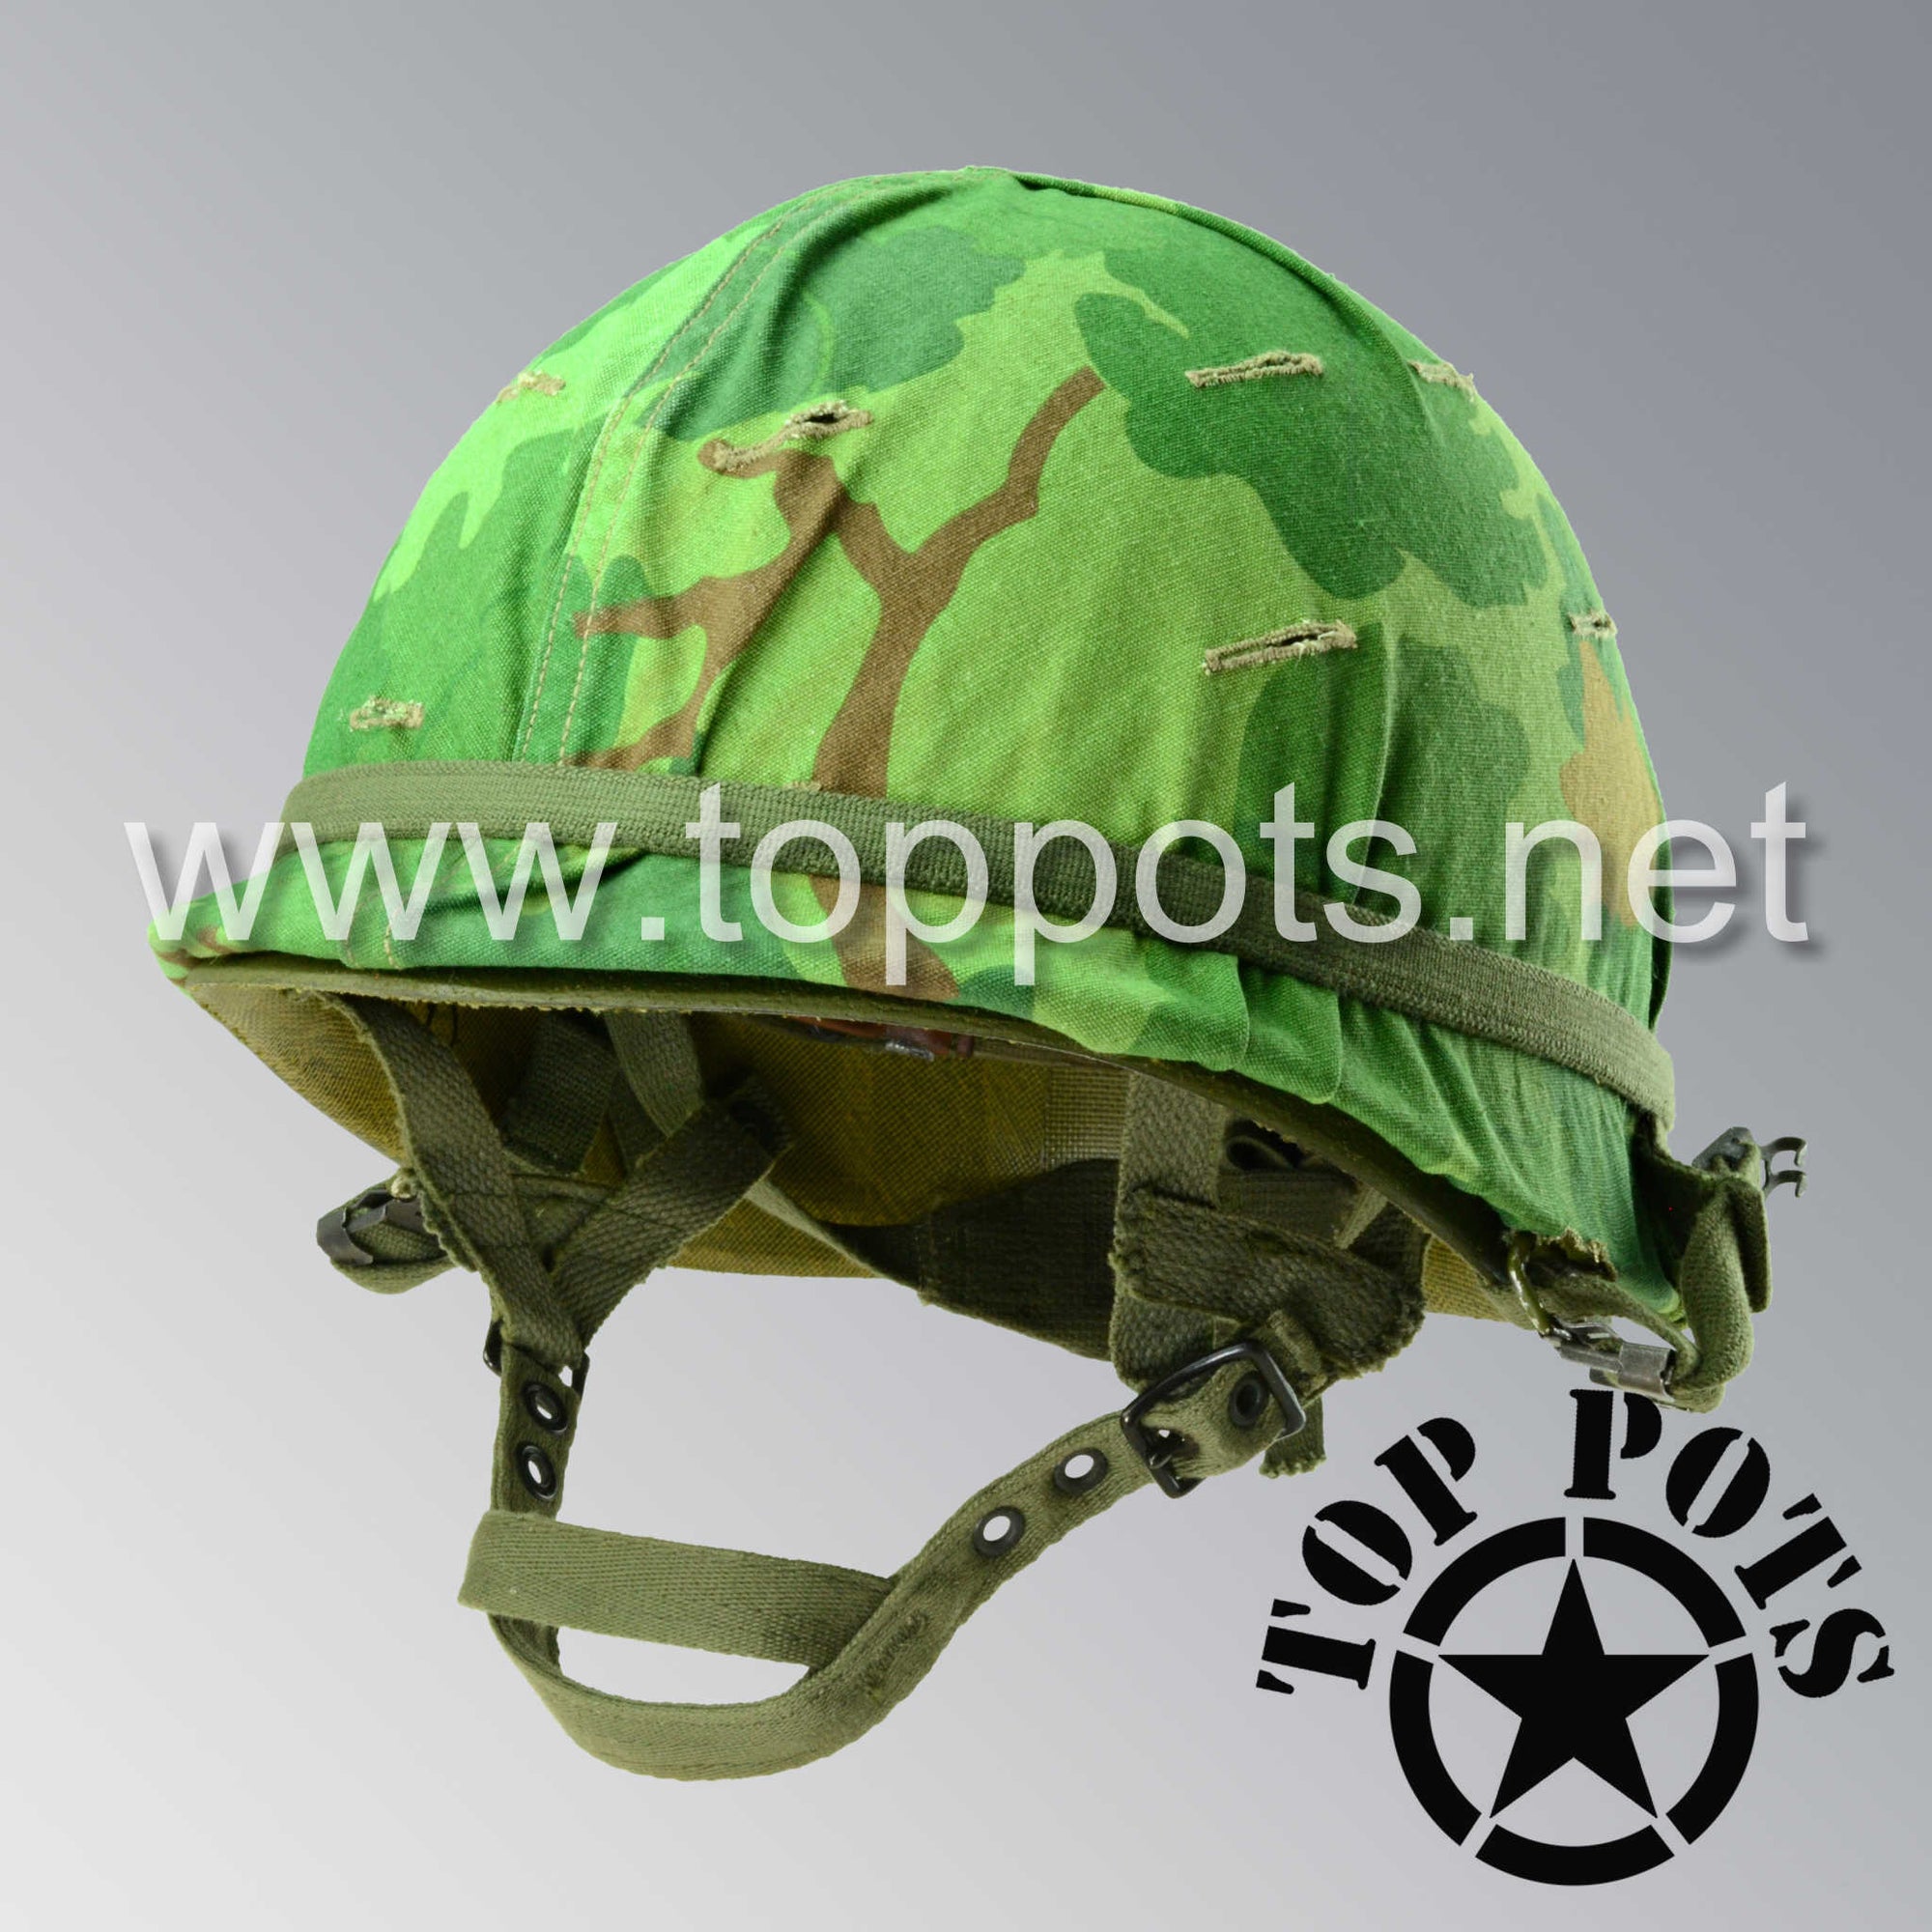 Vietnam War US Army Restored Original P64 M1C Paratrooper Airborne Helmet Swivel Bale Shell and Liner with Mitchell Pattern Camouflage Cover